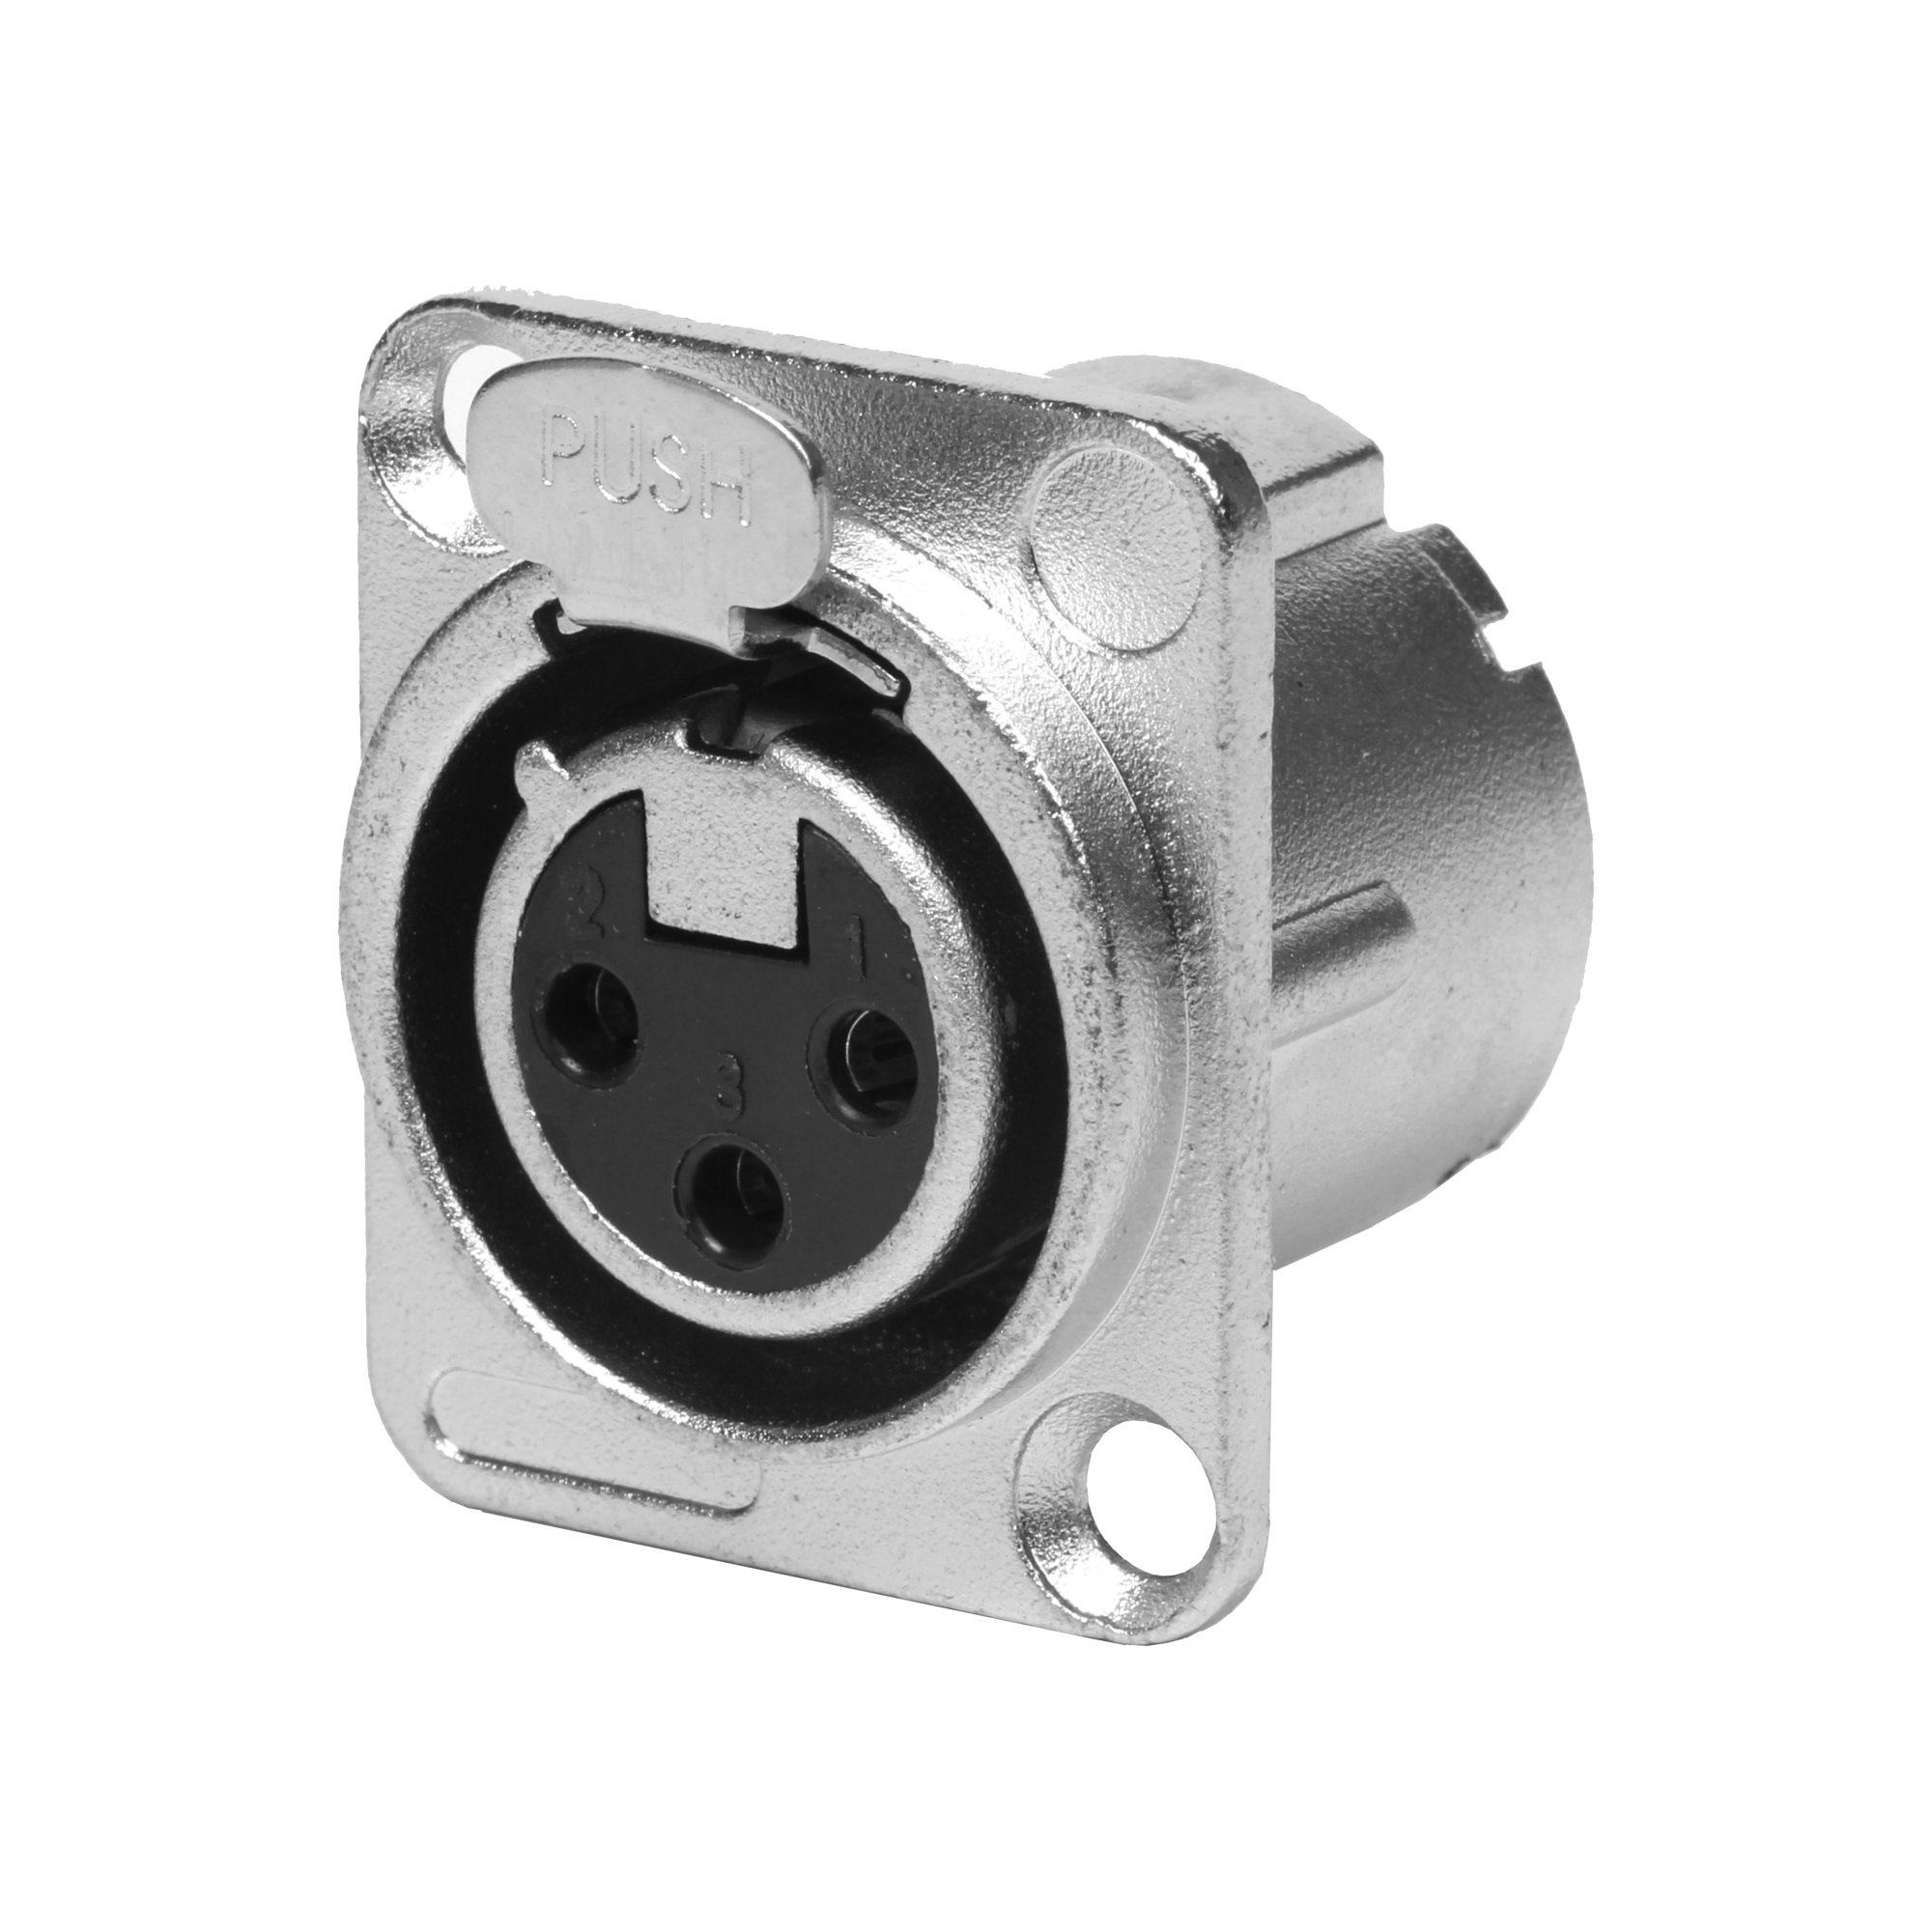 Emelec ViasCom 3-Pin Female XLR Chassis Connector D-Type